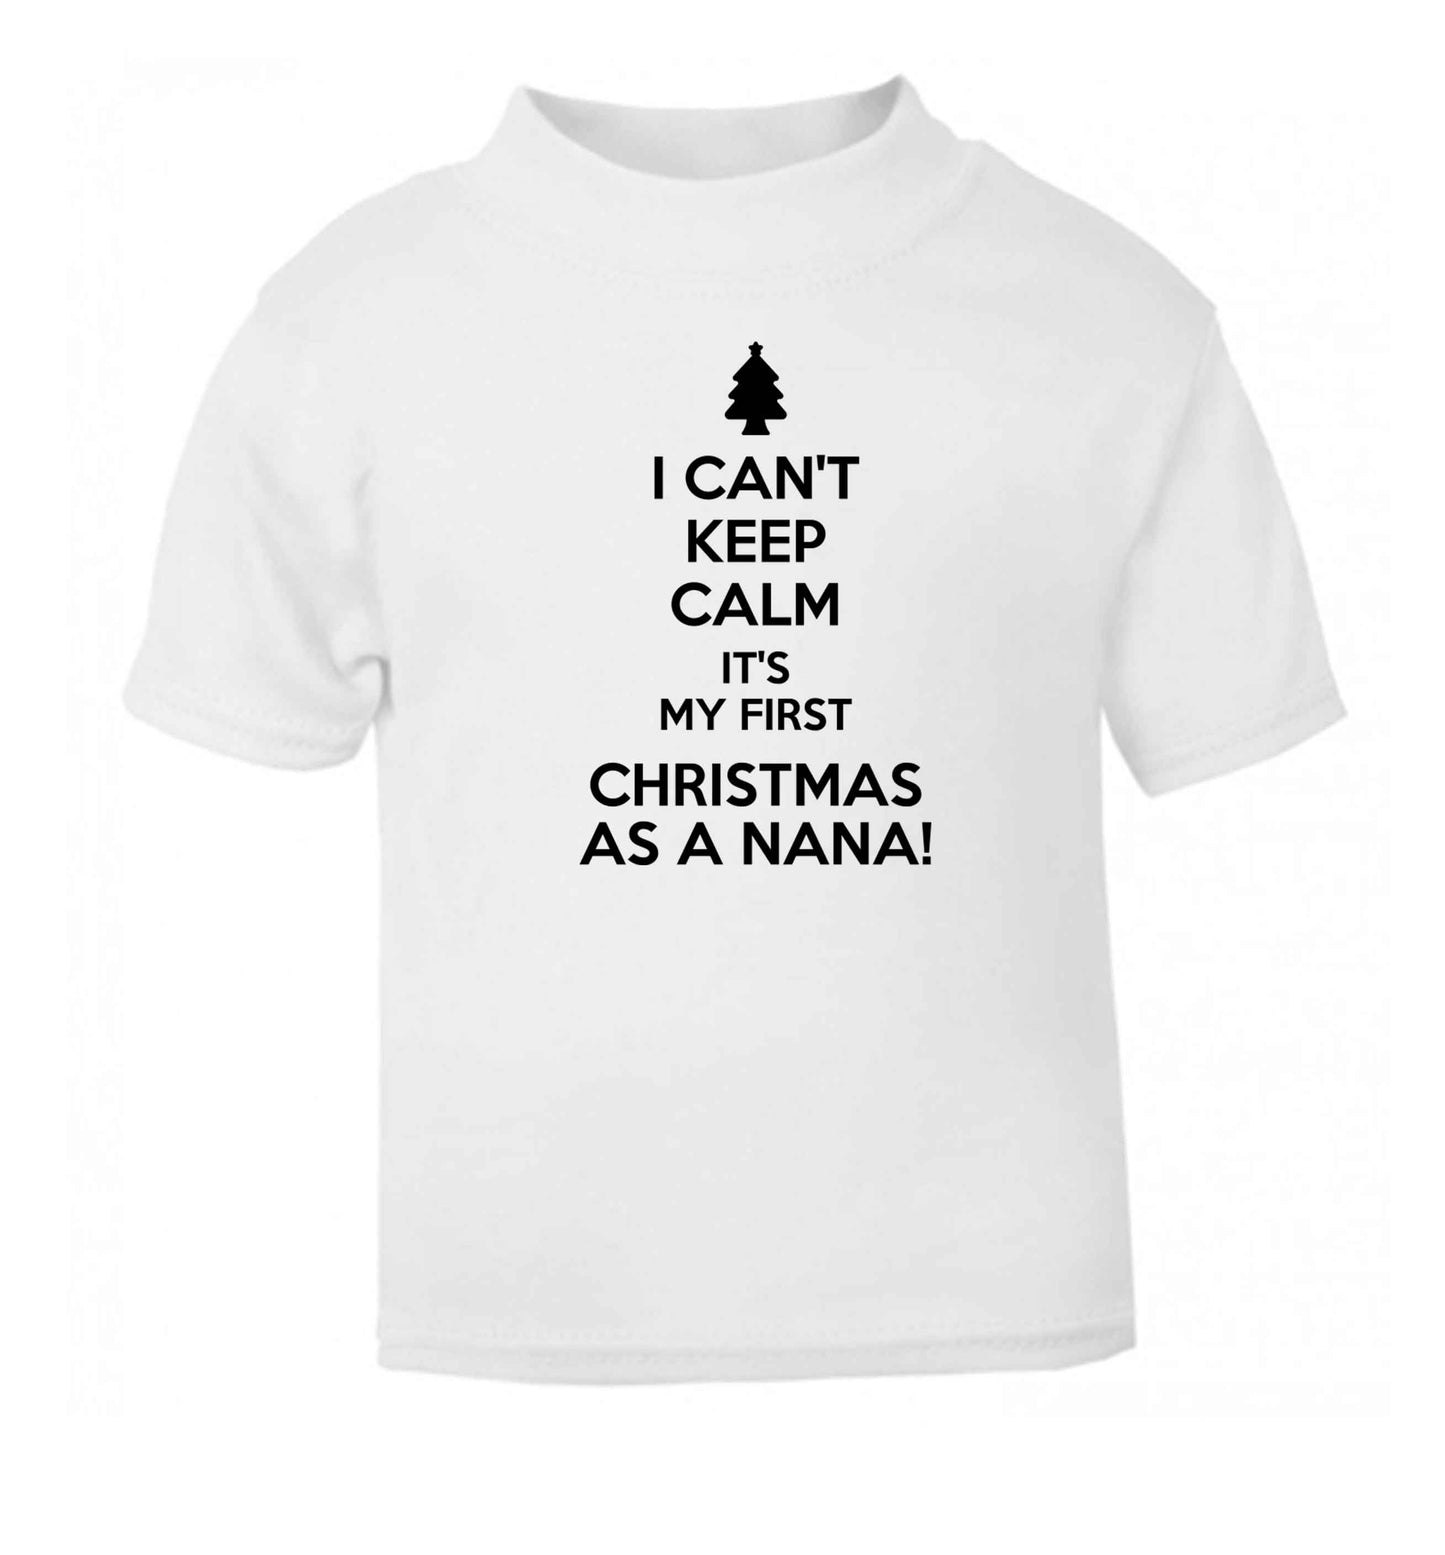 I can't keep calm it's my first Christmas as a nana! white Baby Toddler Tshirt 2 Years